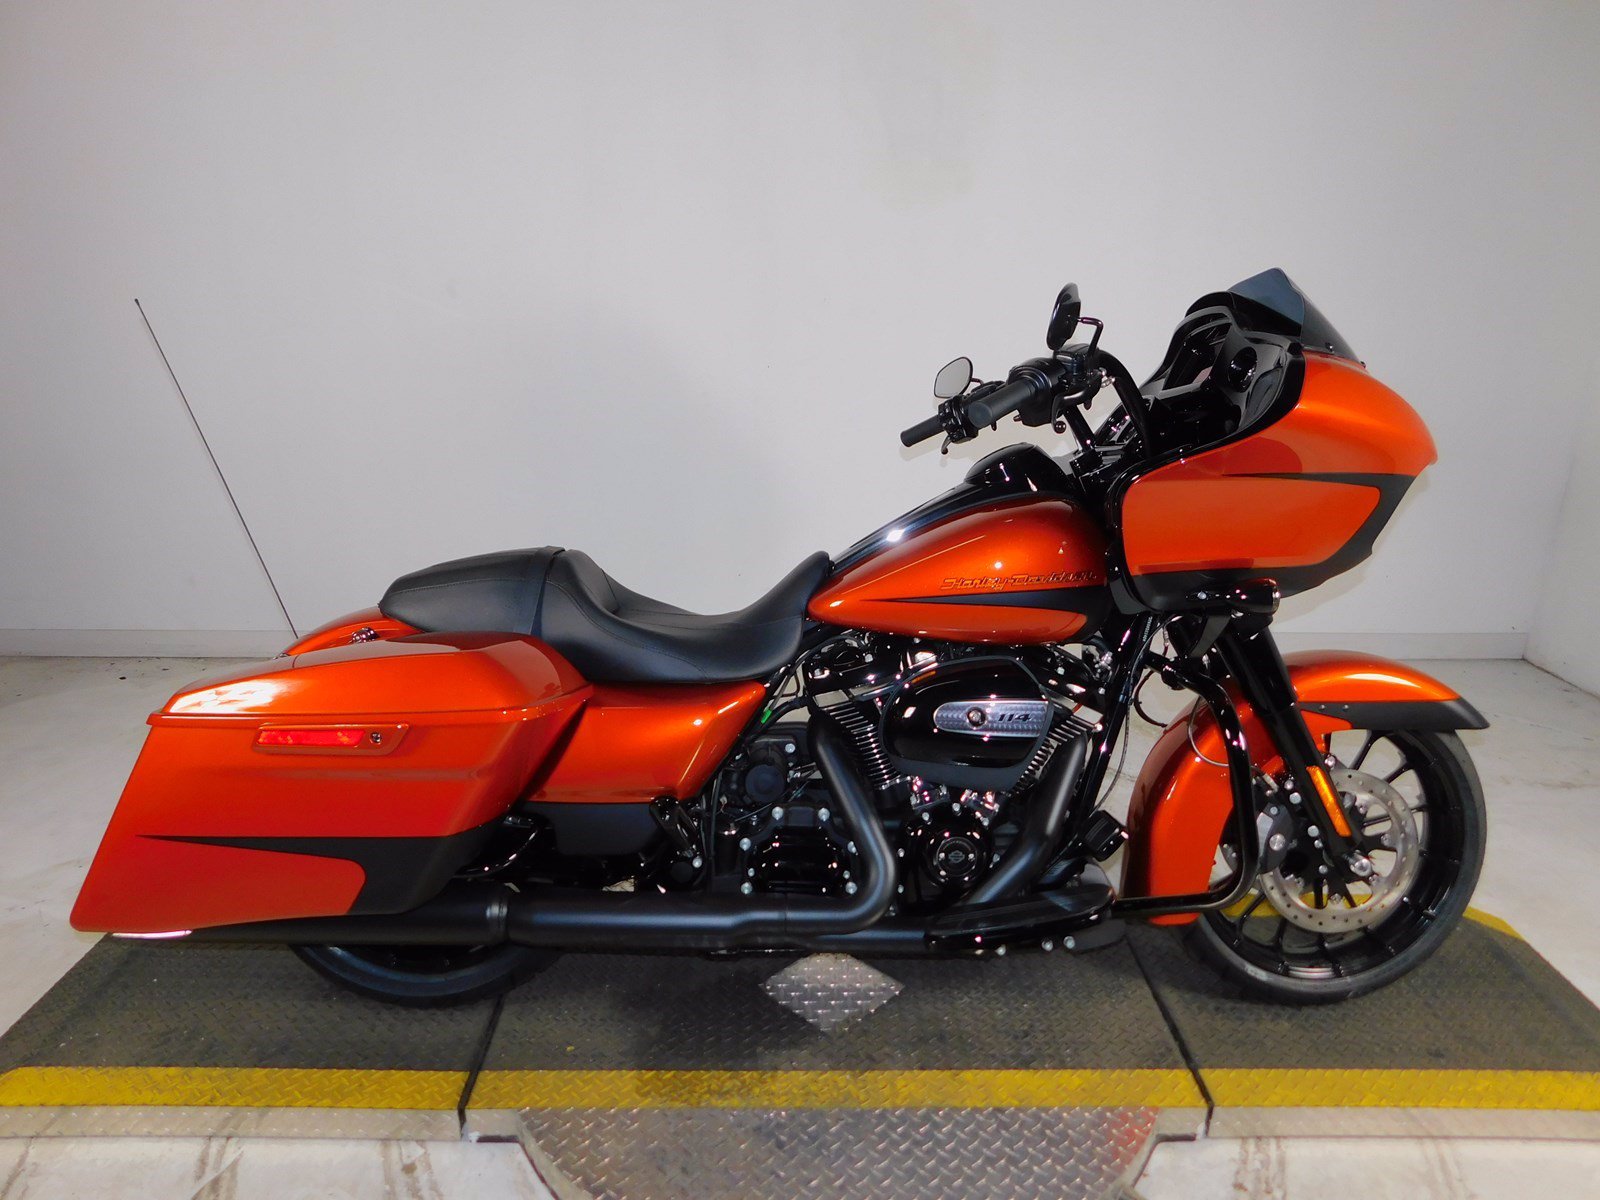 New 2019 Harley-Davidson Road Glide Special FLTRXS Touring in Renton